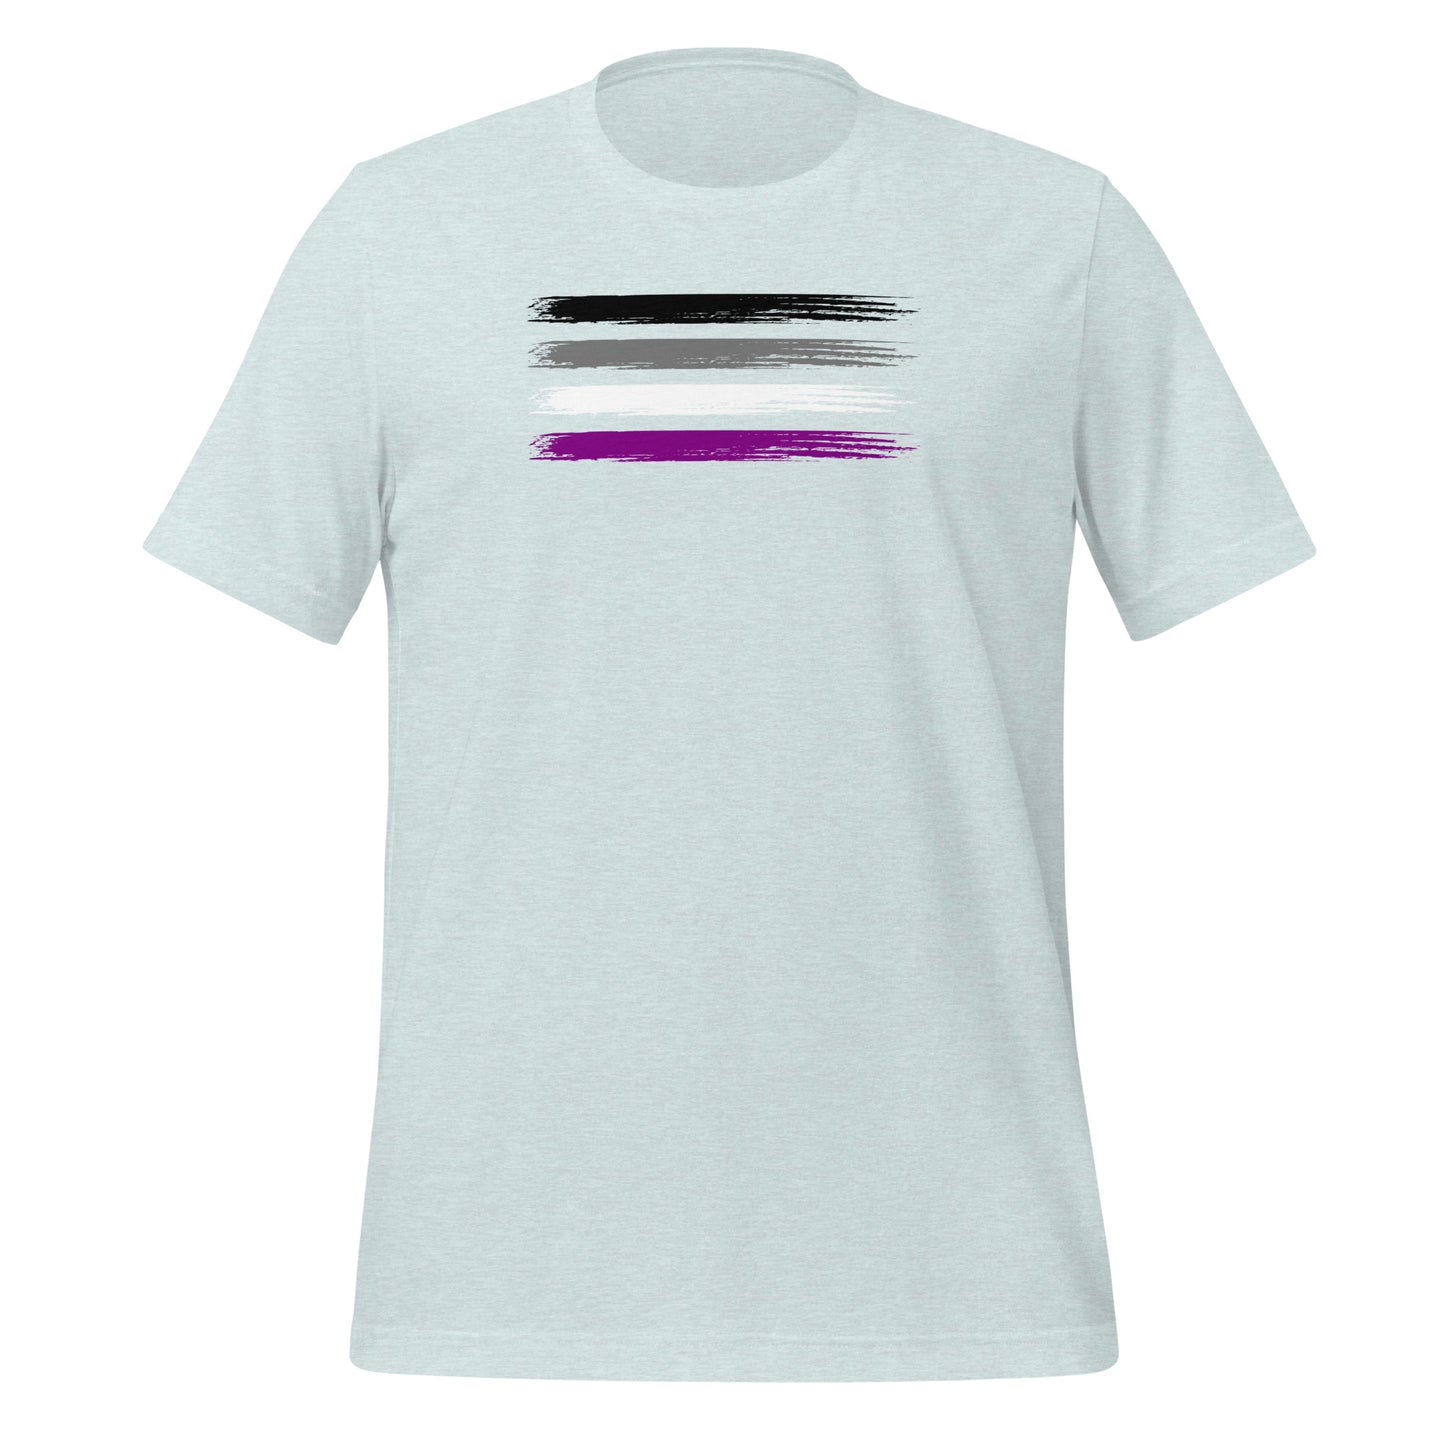 Asexual Pride Flag unisex t-shirt